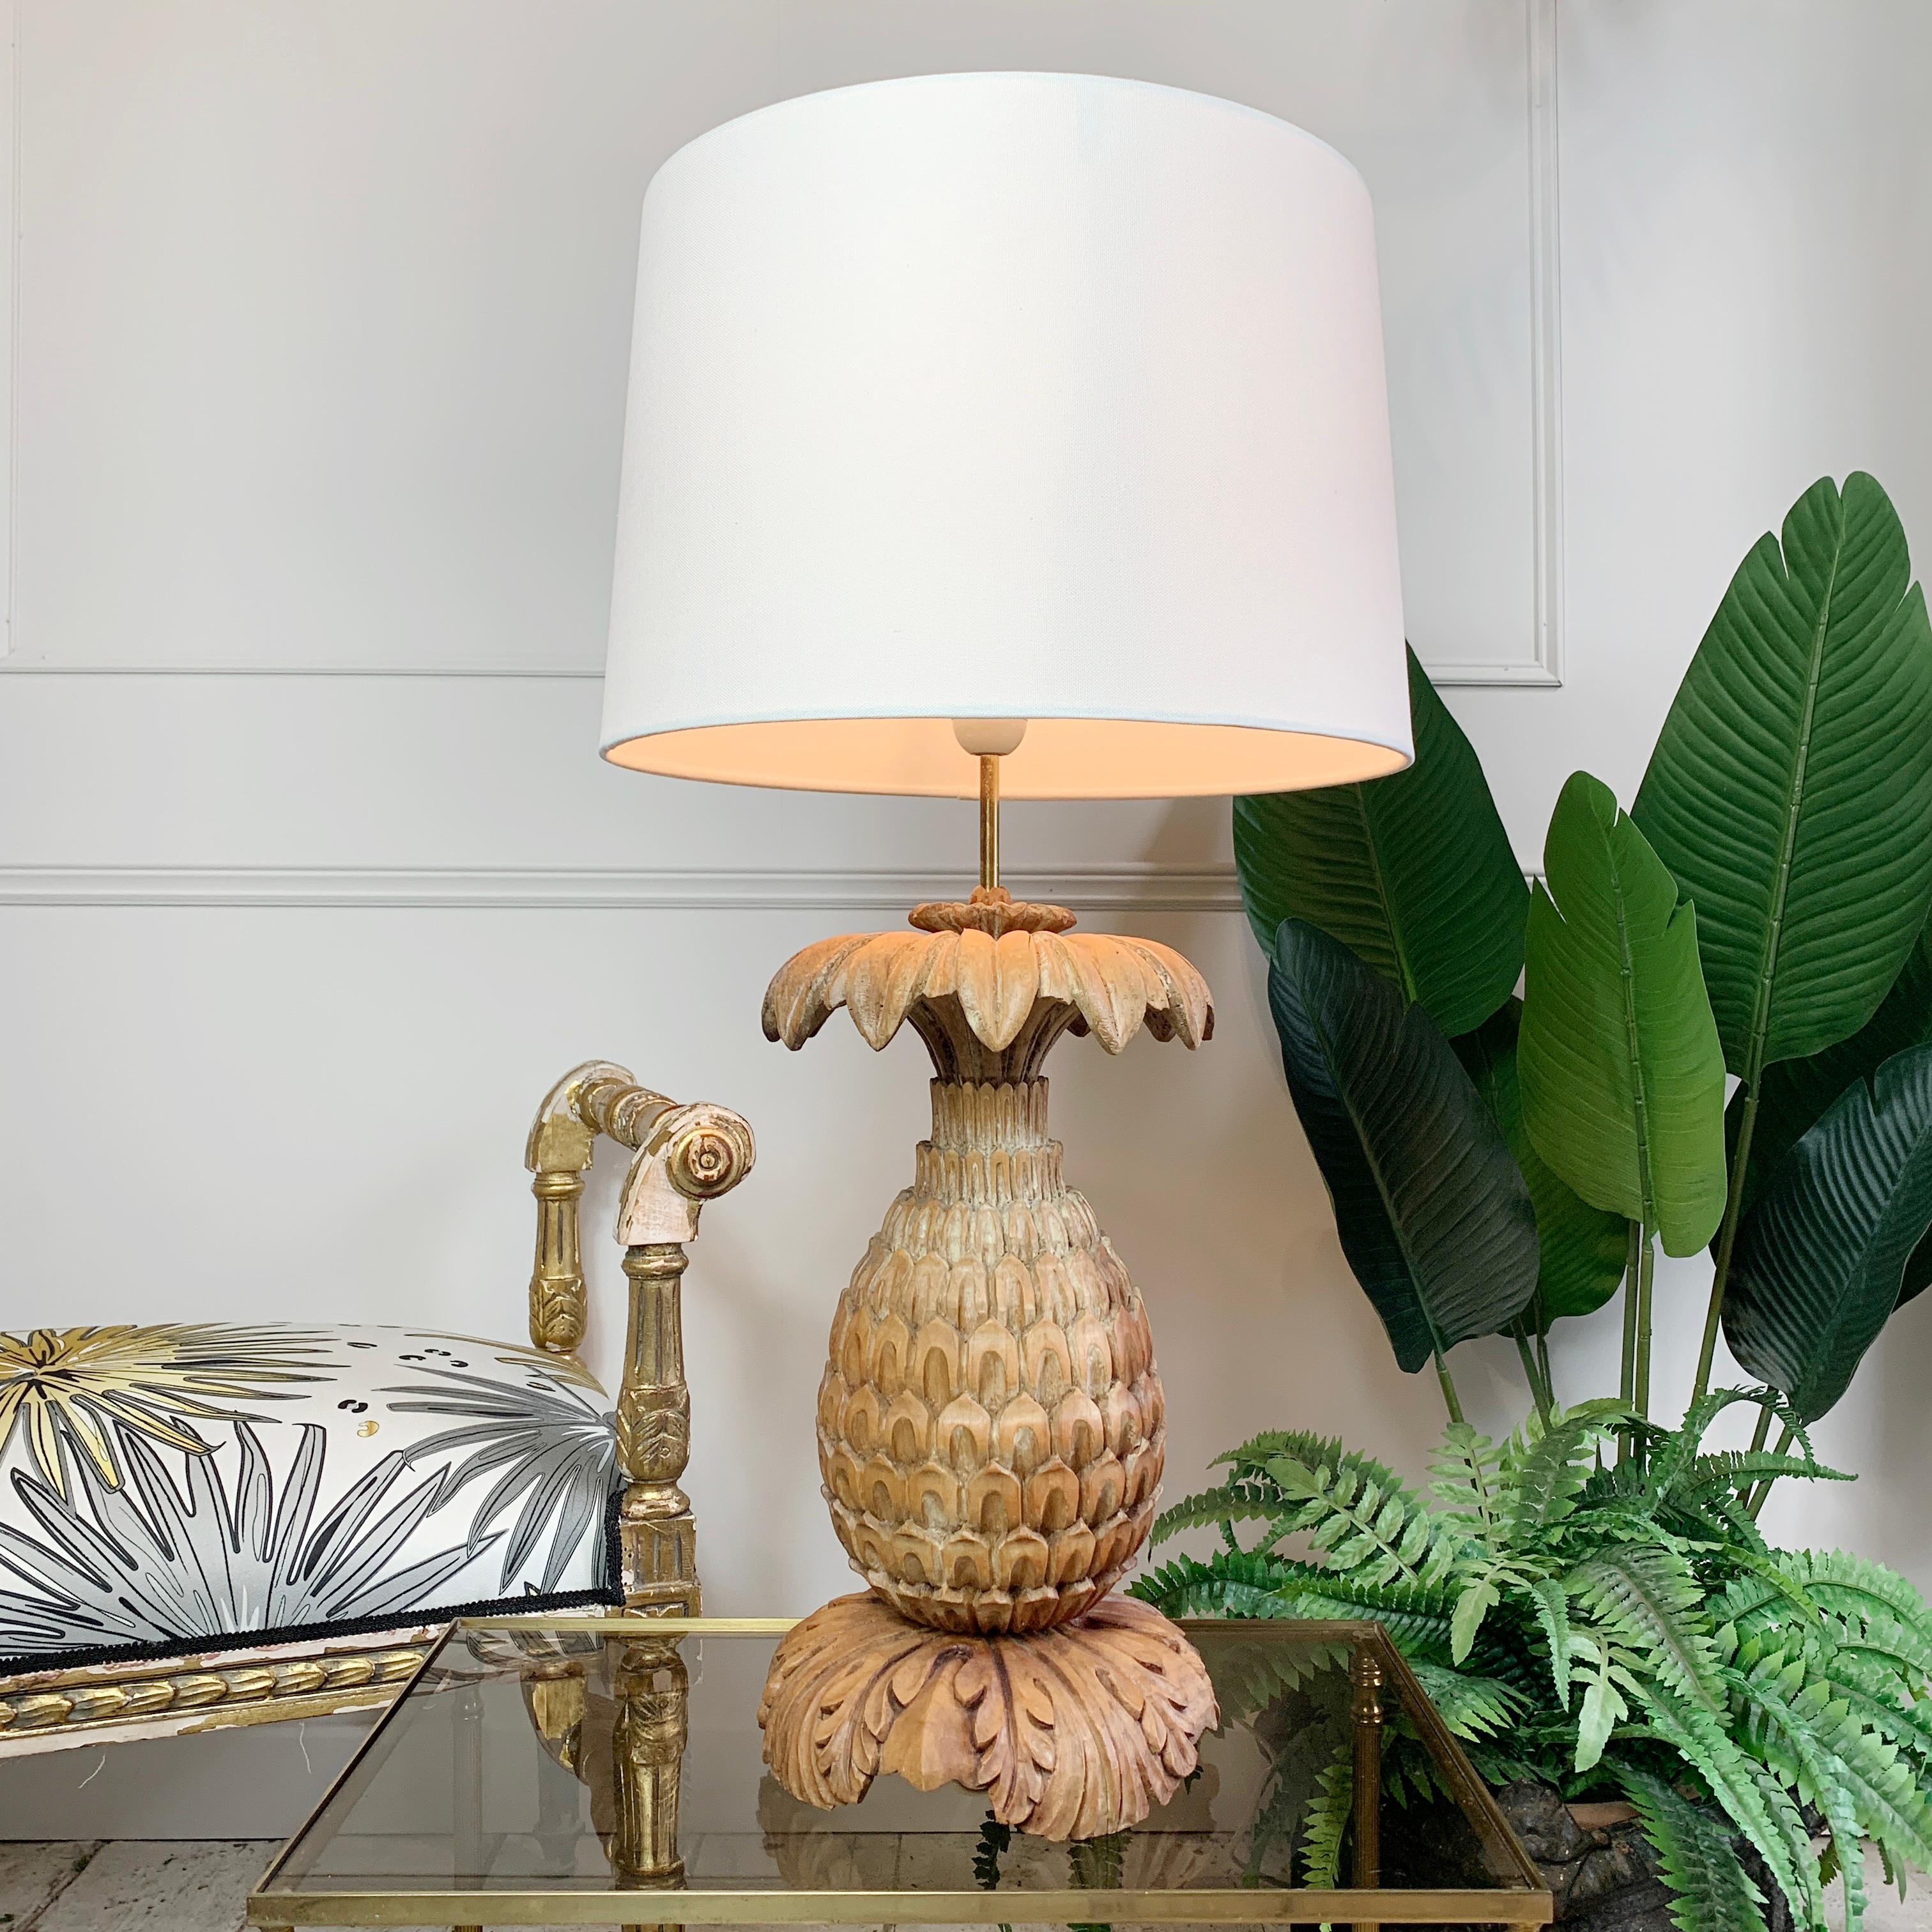 A superb 1930's Pineapple table lamp by Maison Jansen. Carved from a single piece of wood, the detailing and design flourishes on this rare piece are quite exquisite.

There are signs of wear and patina which are to b expected from a piece of this